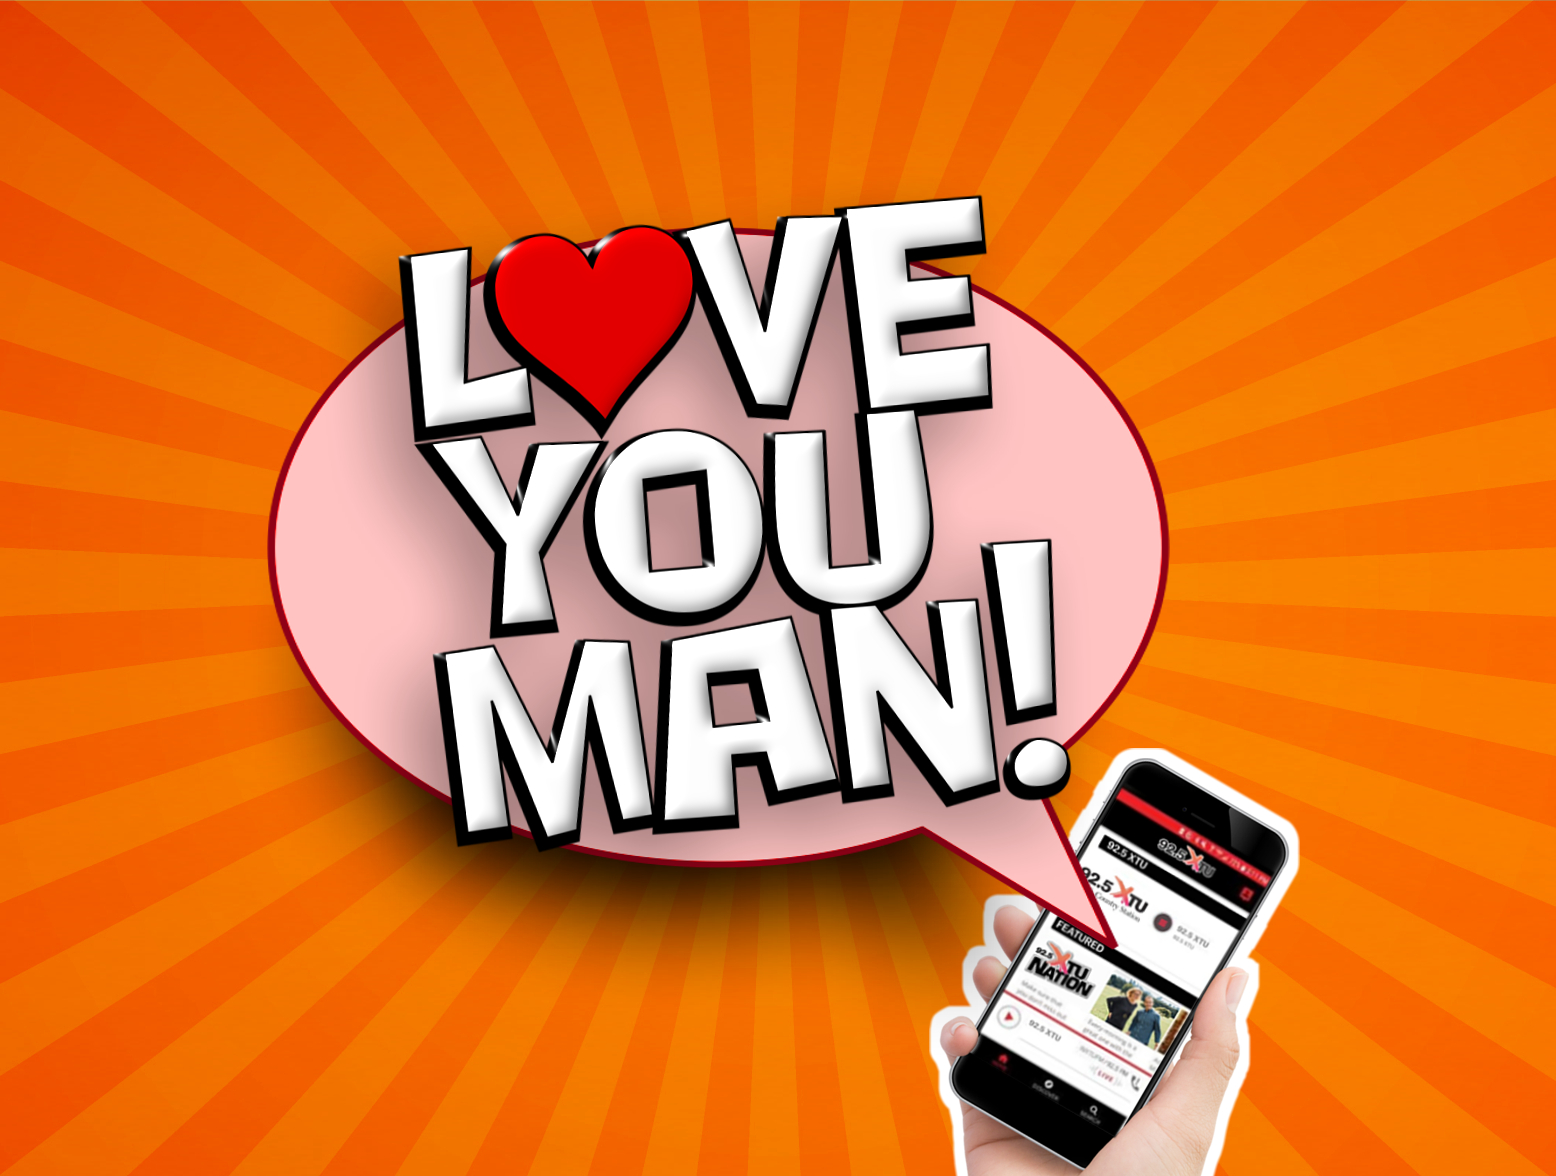 NEW: Love You Man - Hunting and Apparel Store